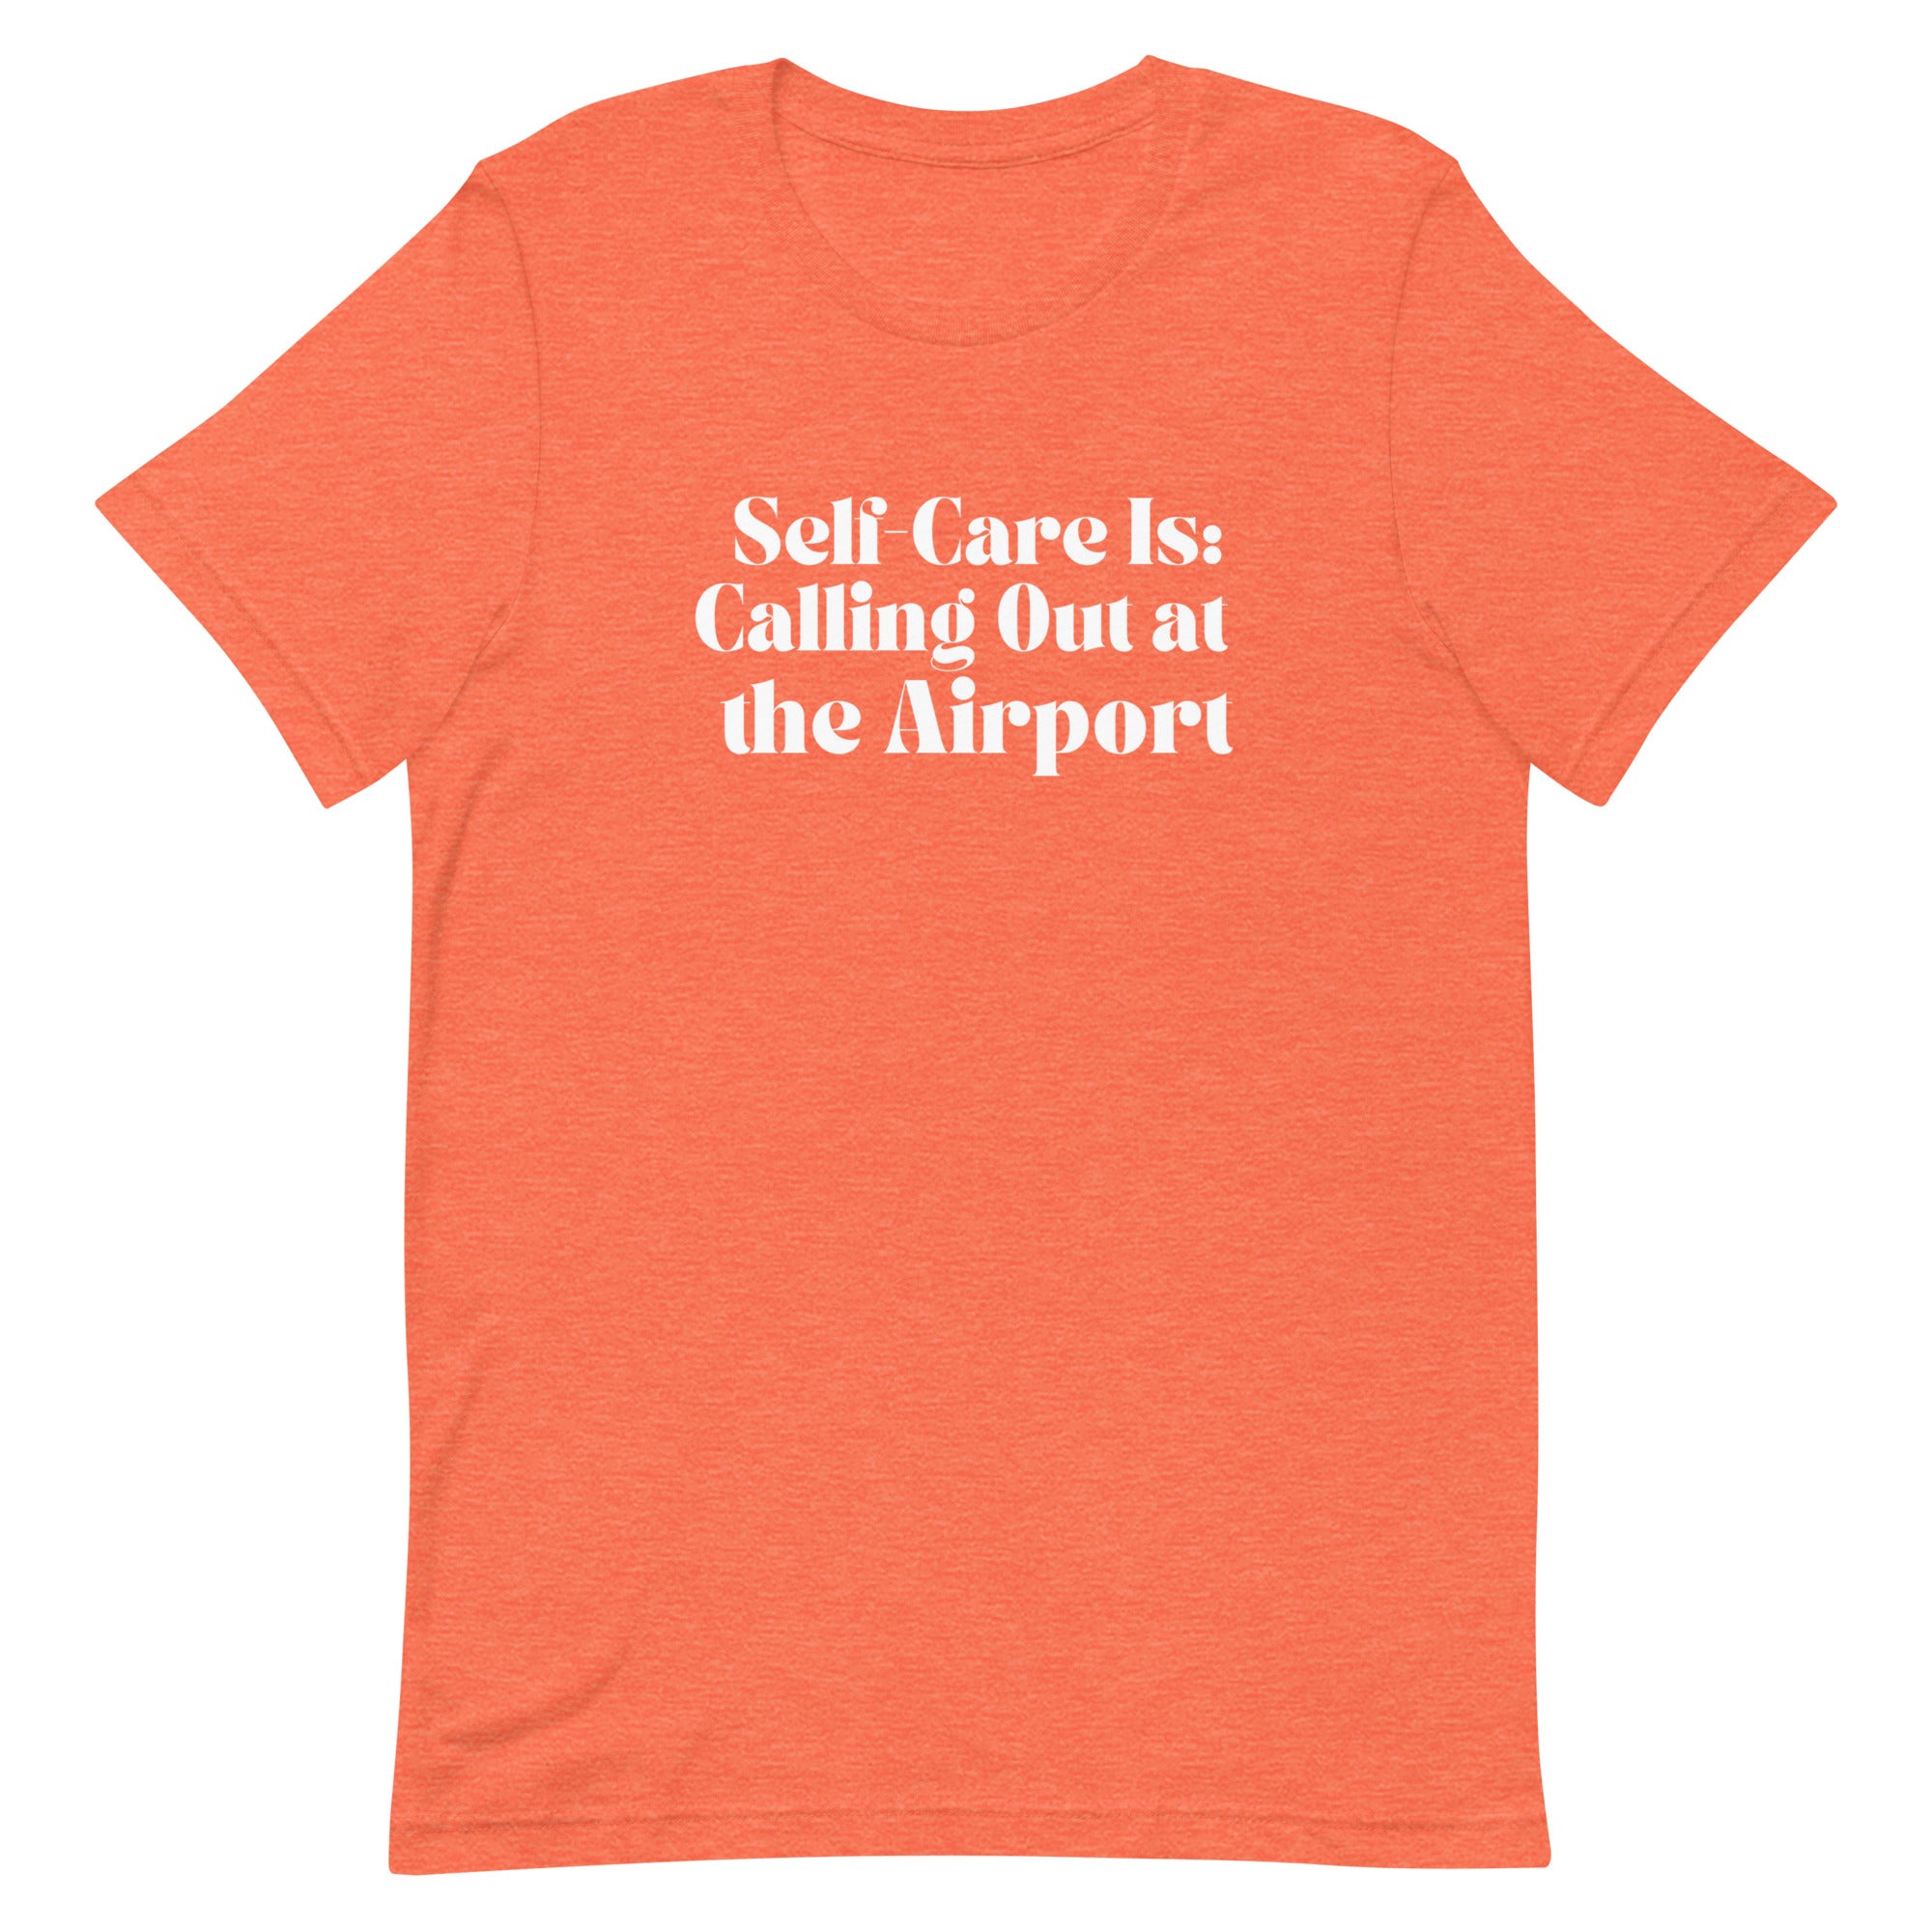 Self-Care Is, Calling Out Unisex T-shirt